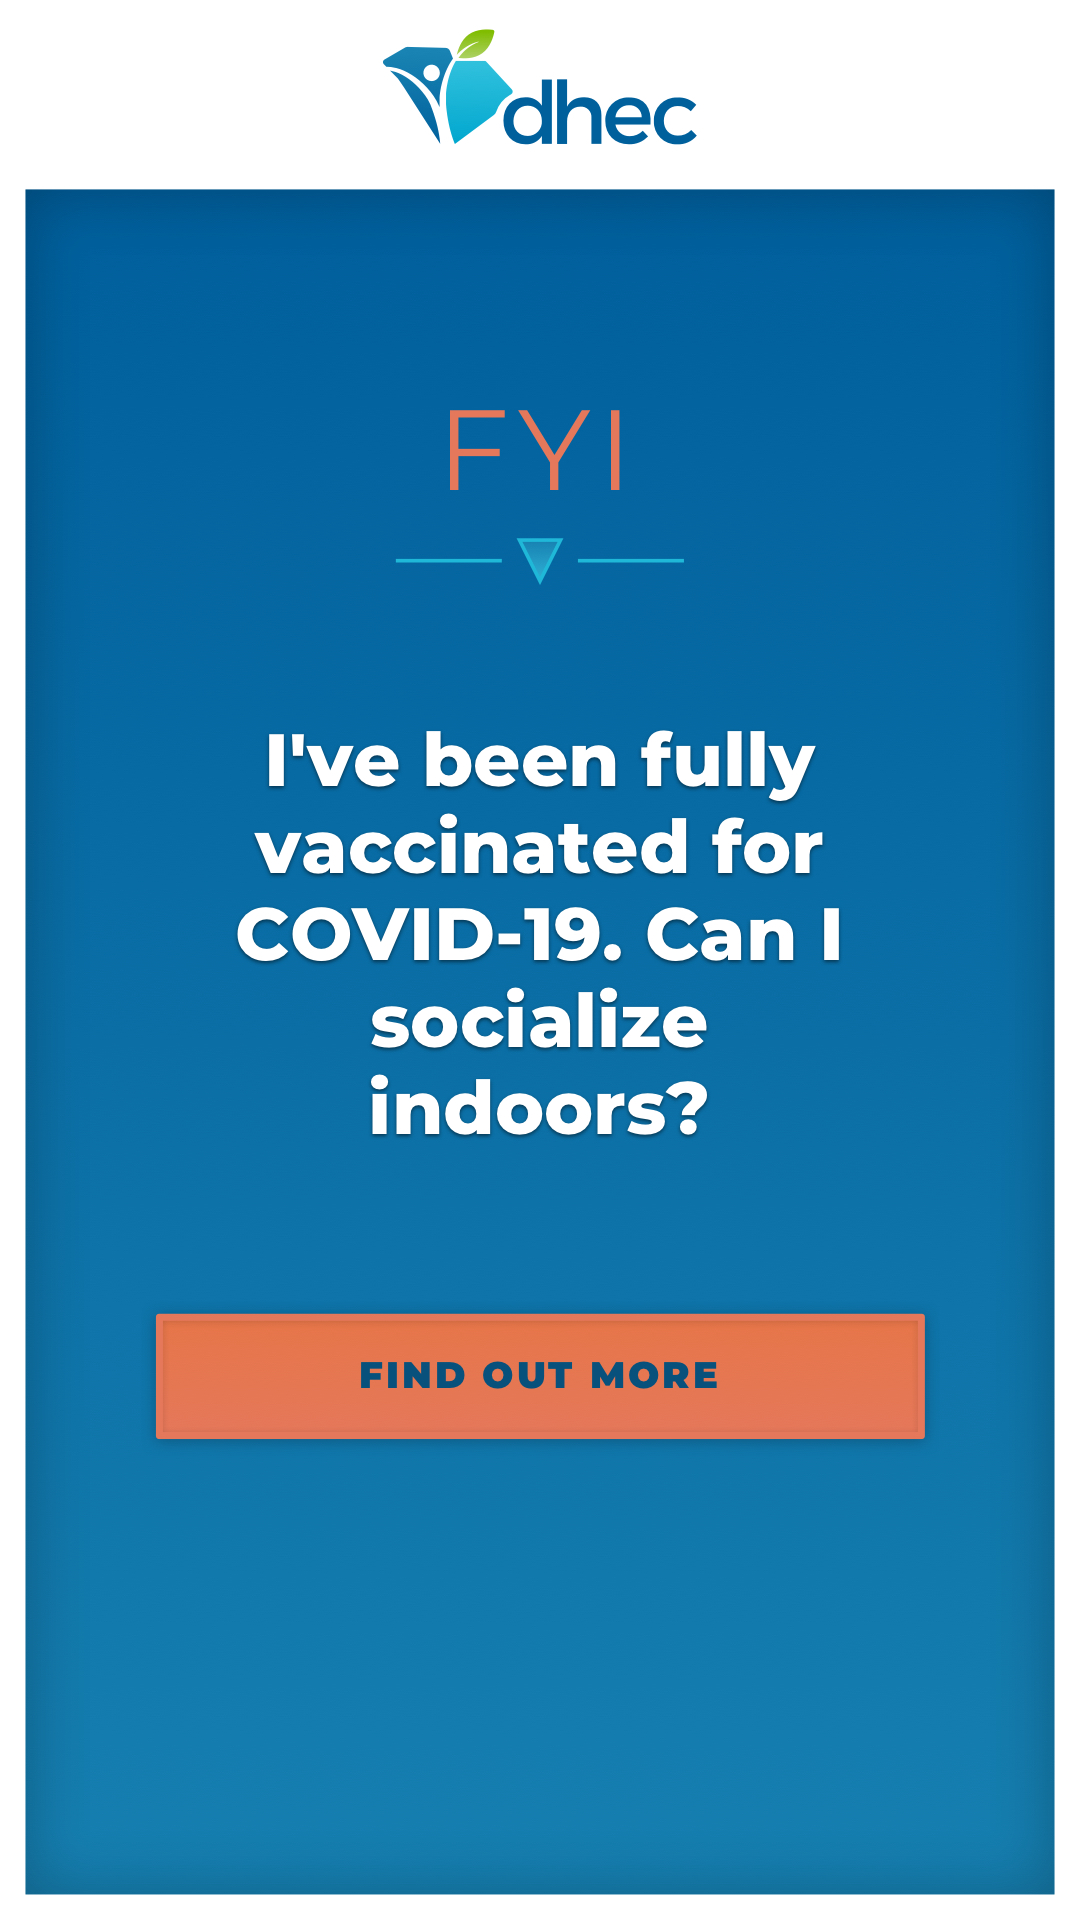 I've been fully vaccinated for COVID-19. Can I socialize indoors?